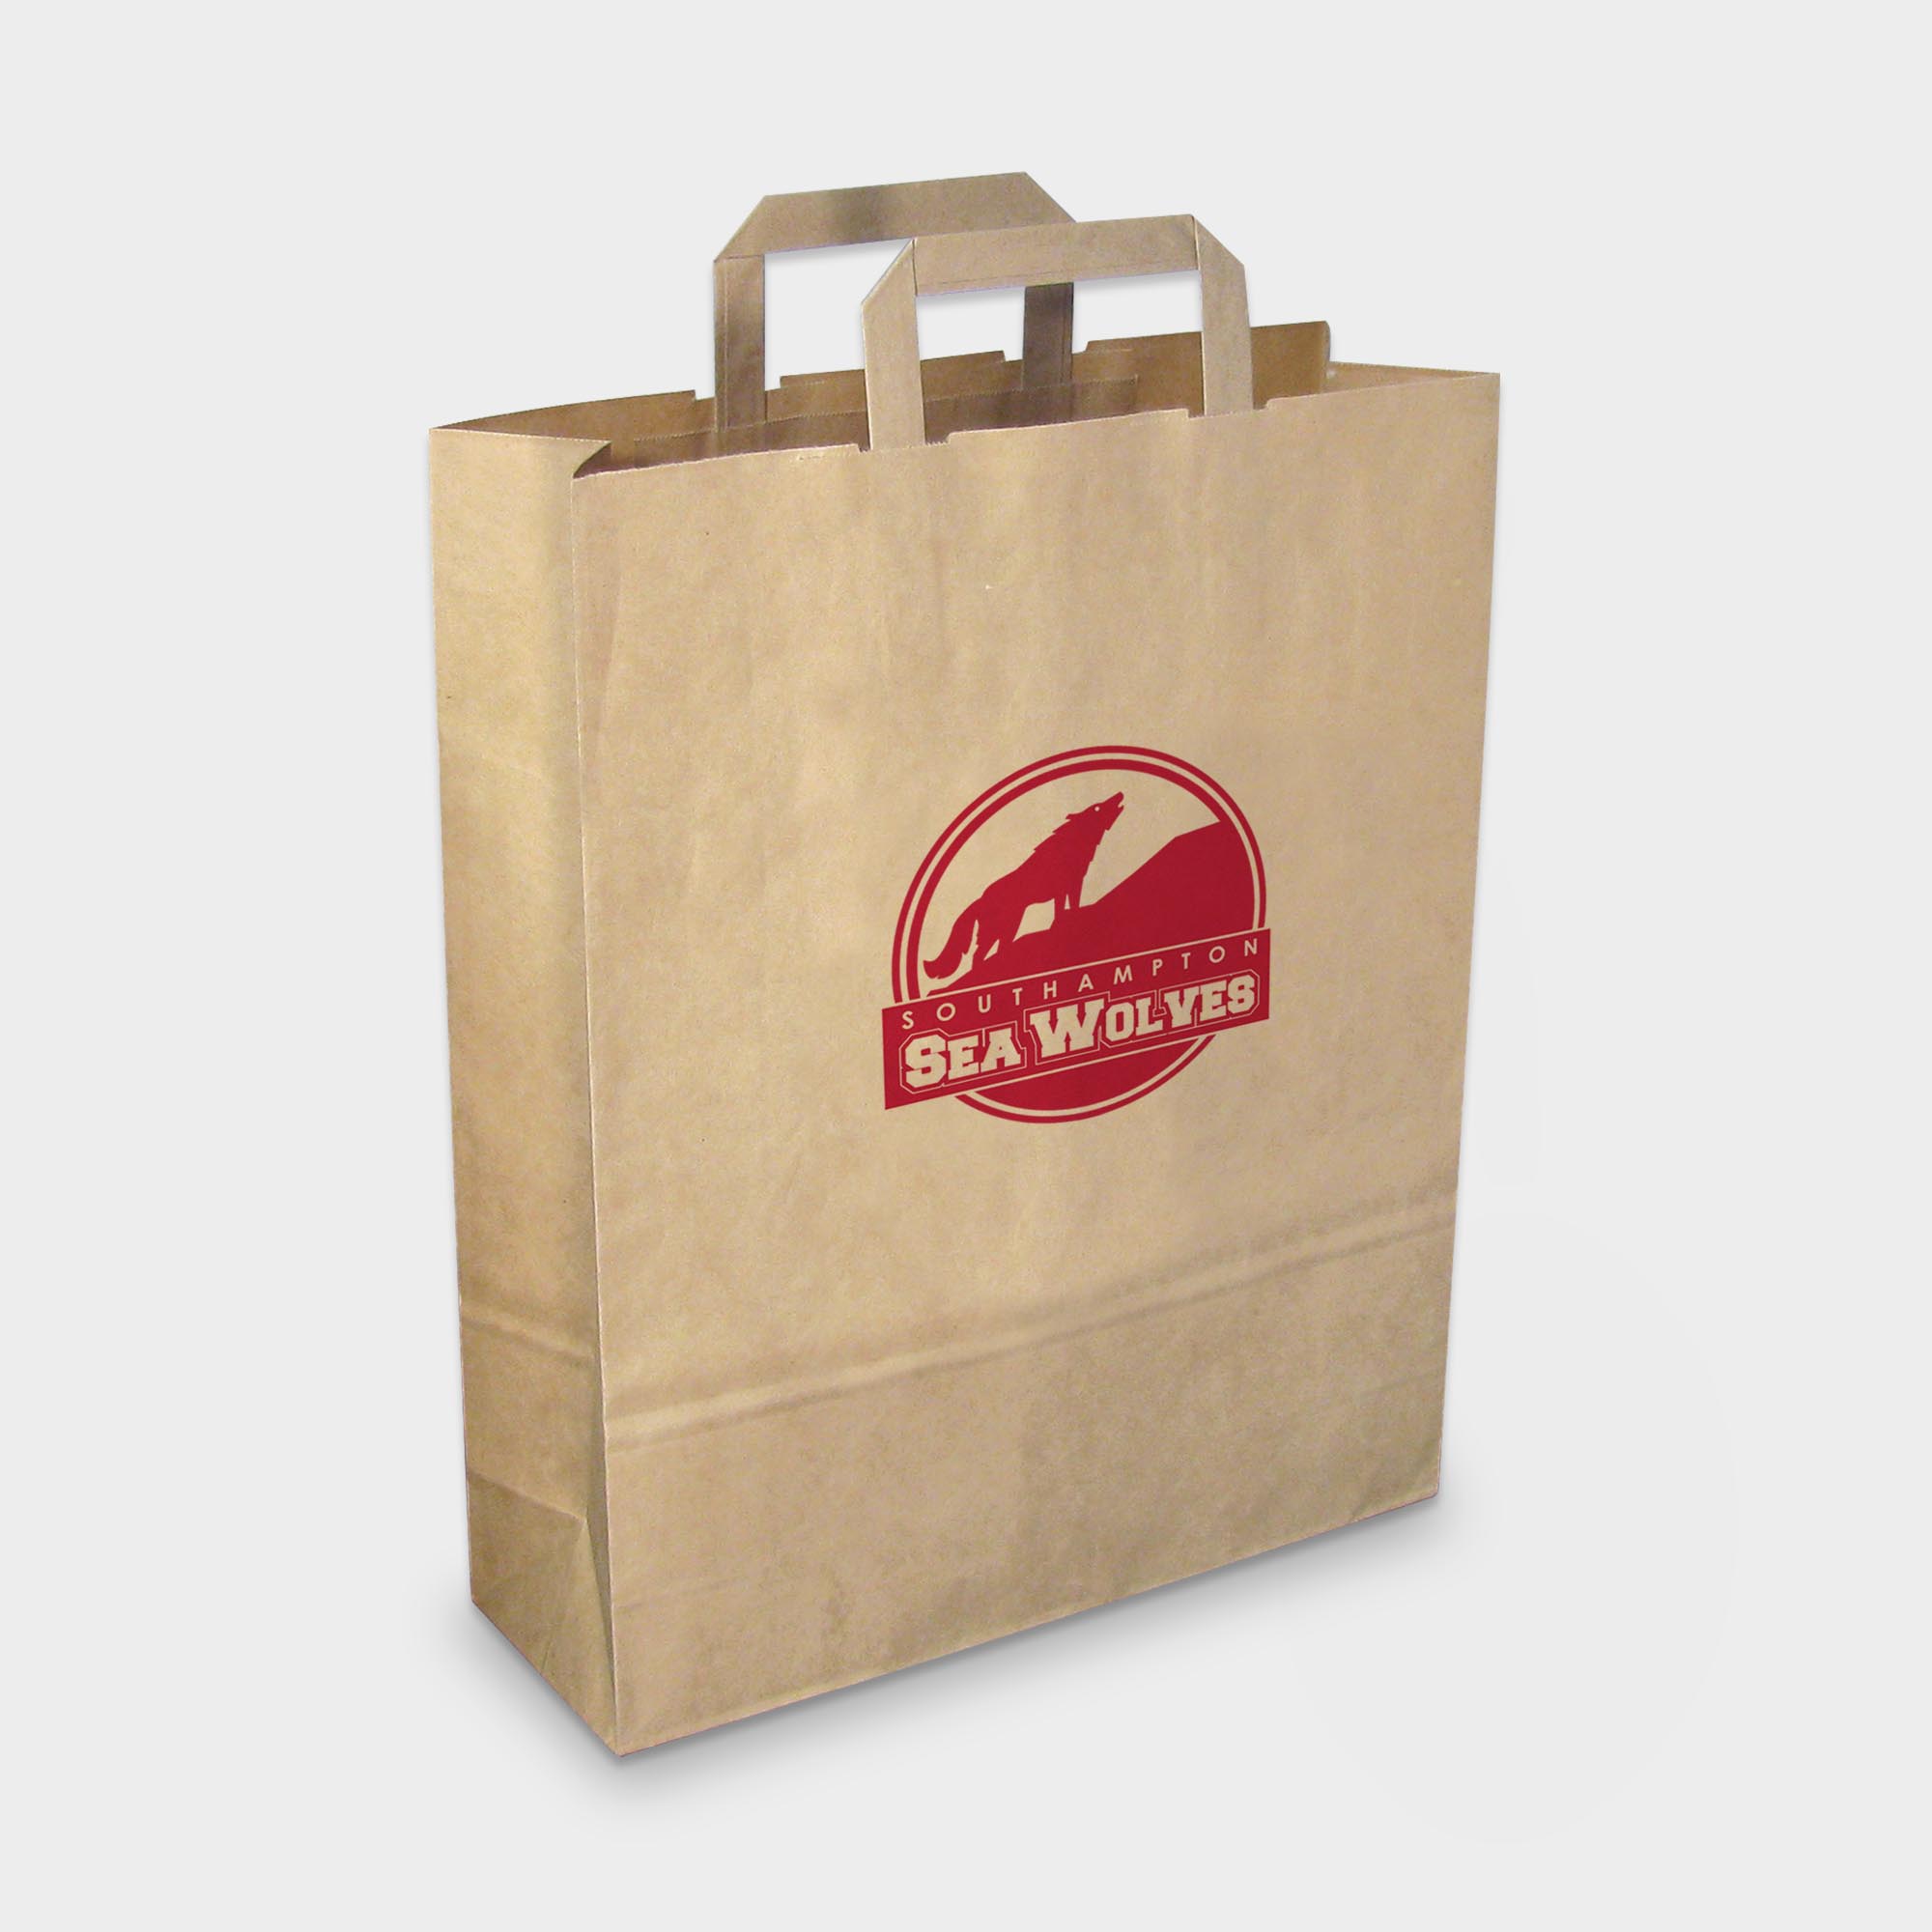 The Green & Good Recycled Paper Carrier Large is made from recycled paper. It comes as standard with flat tape handles and is only available in brown. Made in the EU, it is great for give-aways and sturdy enough for groceries. 90gsm.